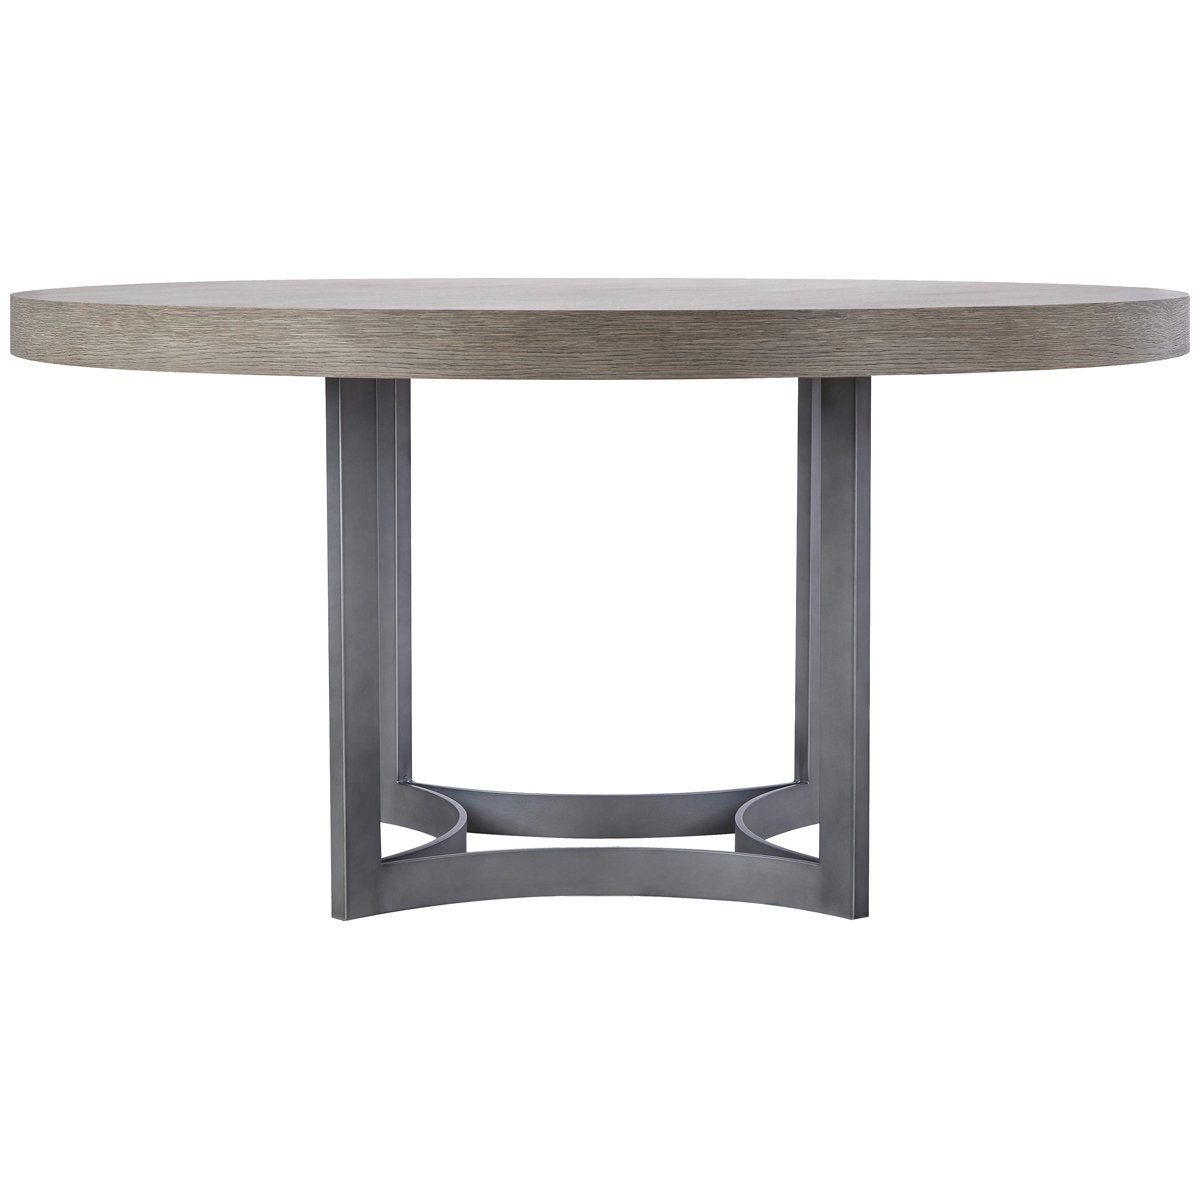 Sonder Living Paxton 60-Inch Dining Table